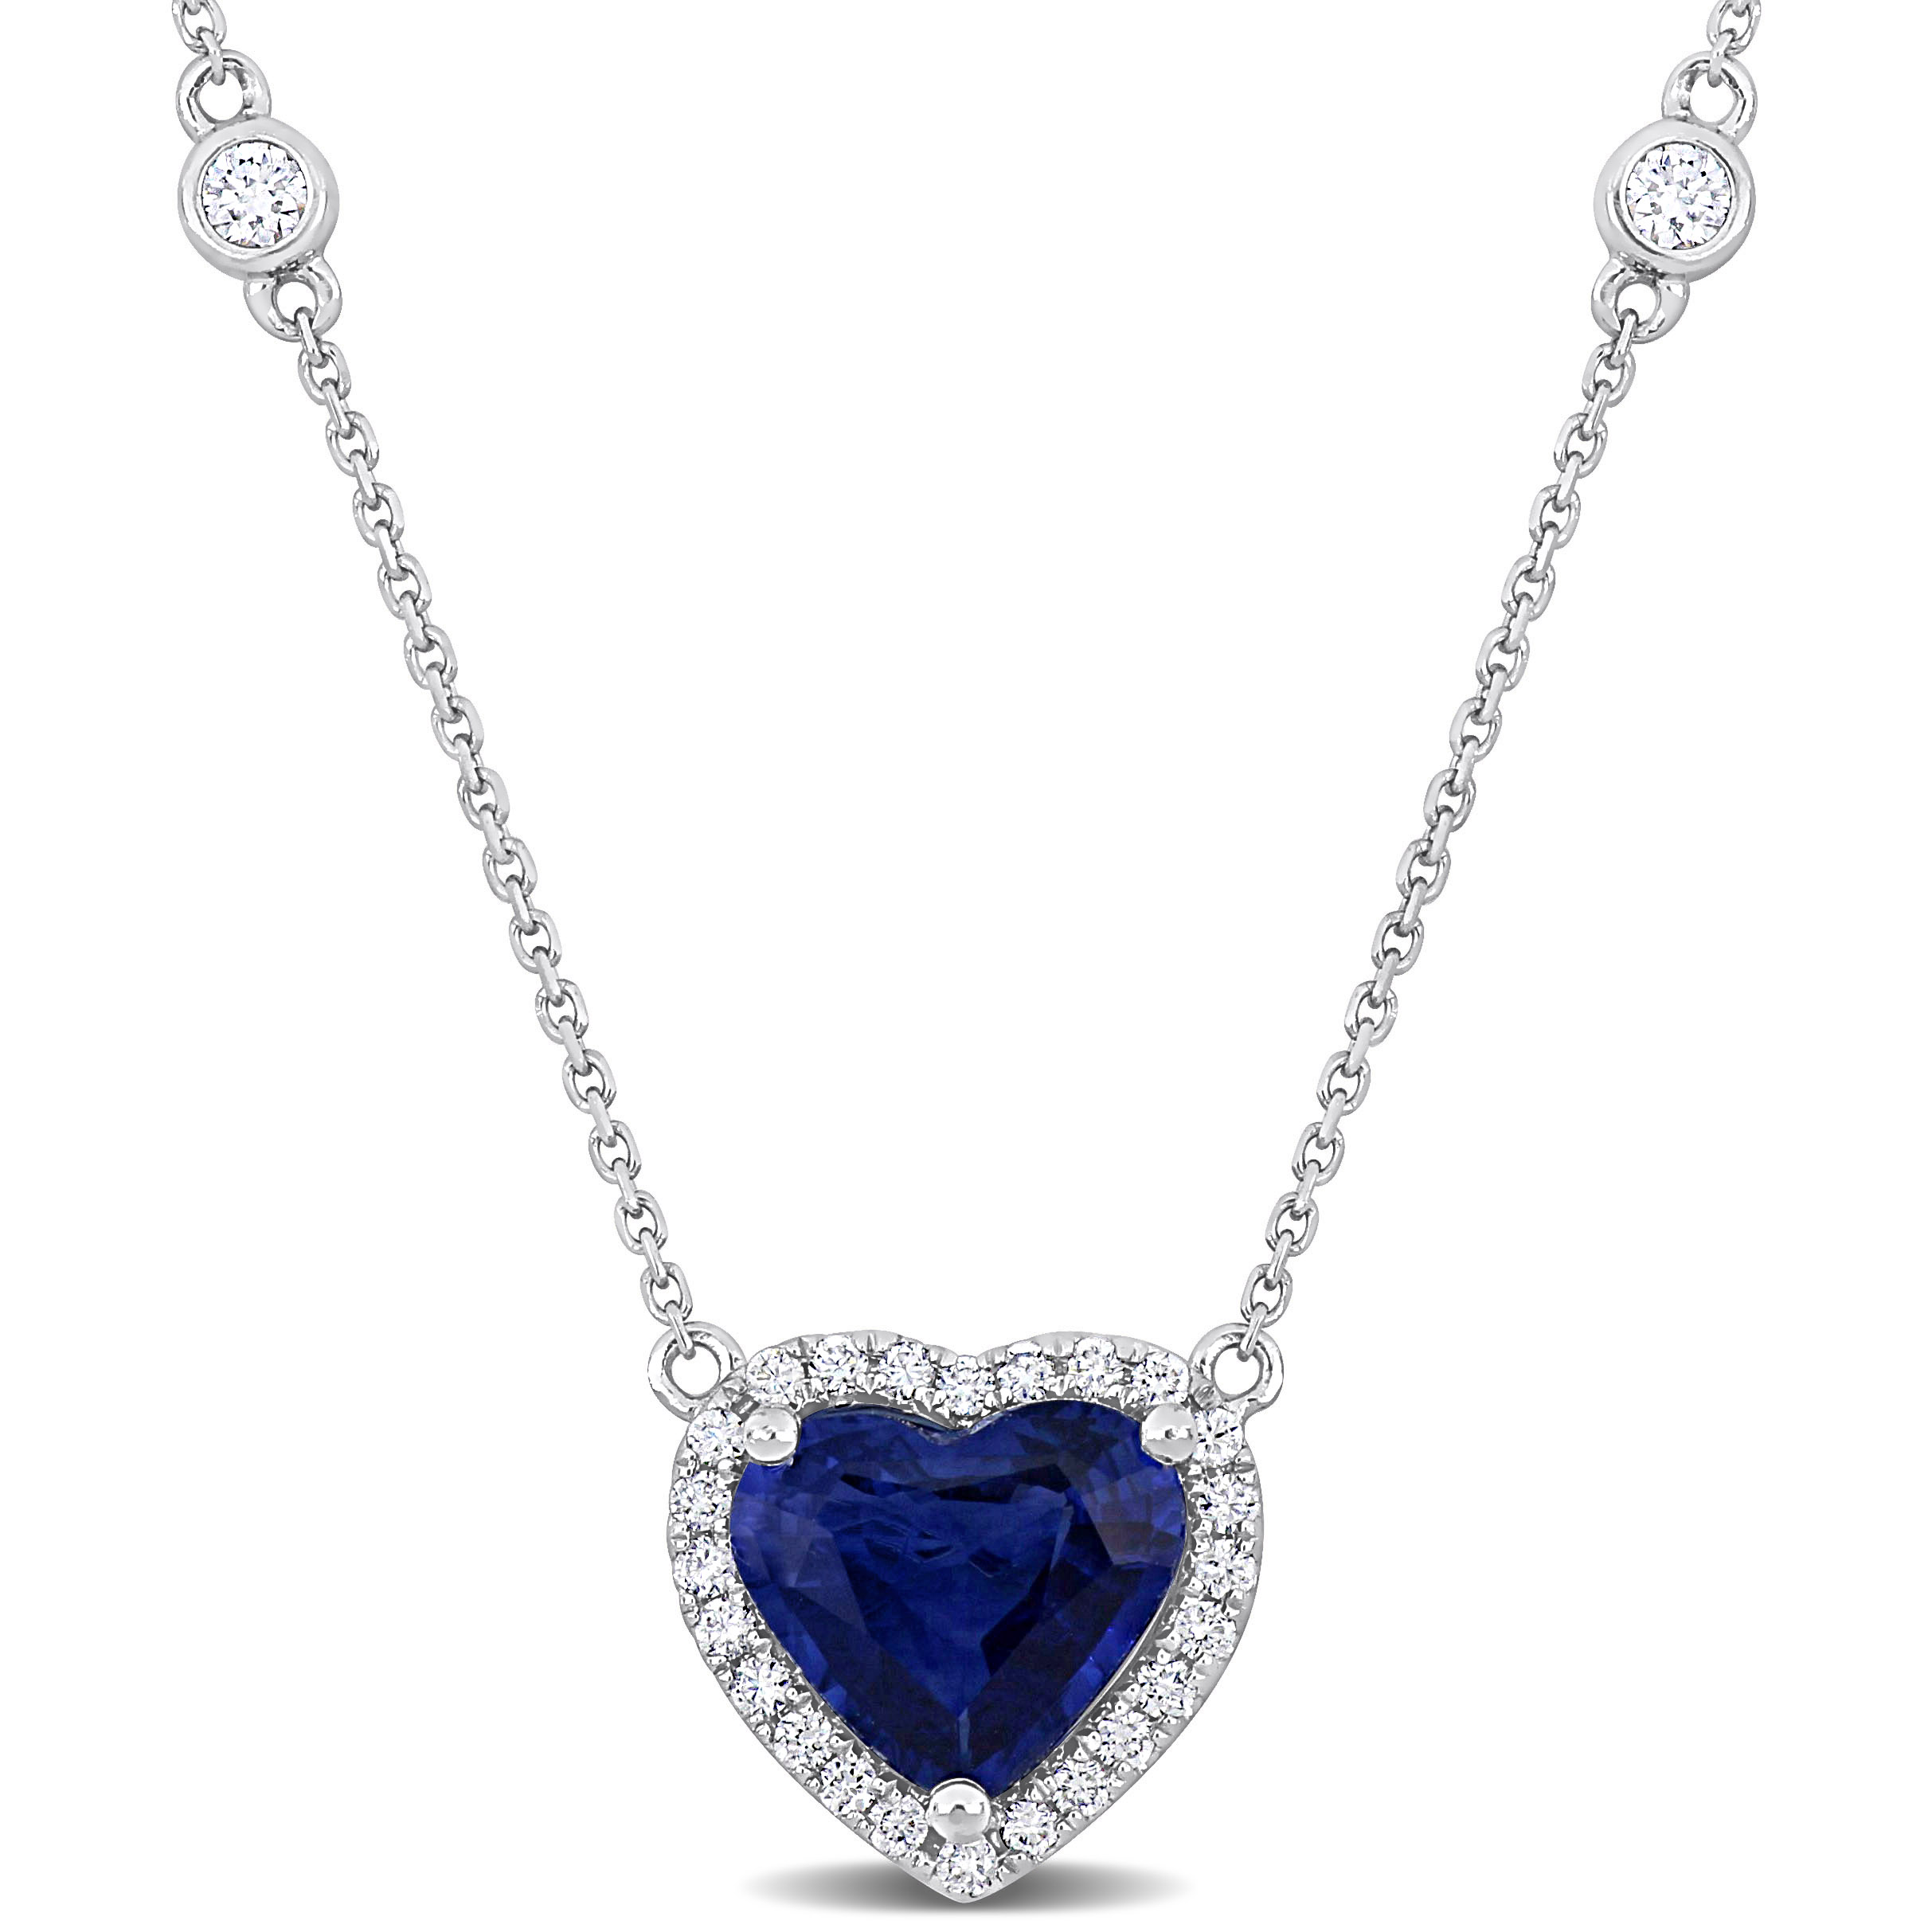 2 1/5 CT TGW Blue Sapphire 1/3 CT TDW Diamond Heart Halo Necklace in 14k White Gold - 16 in.